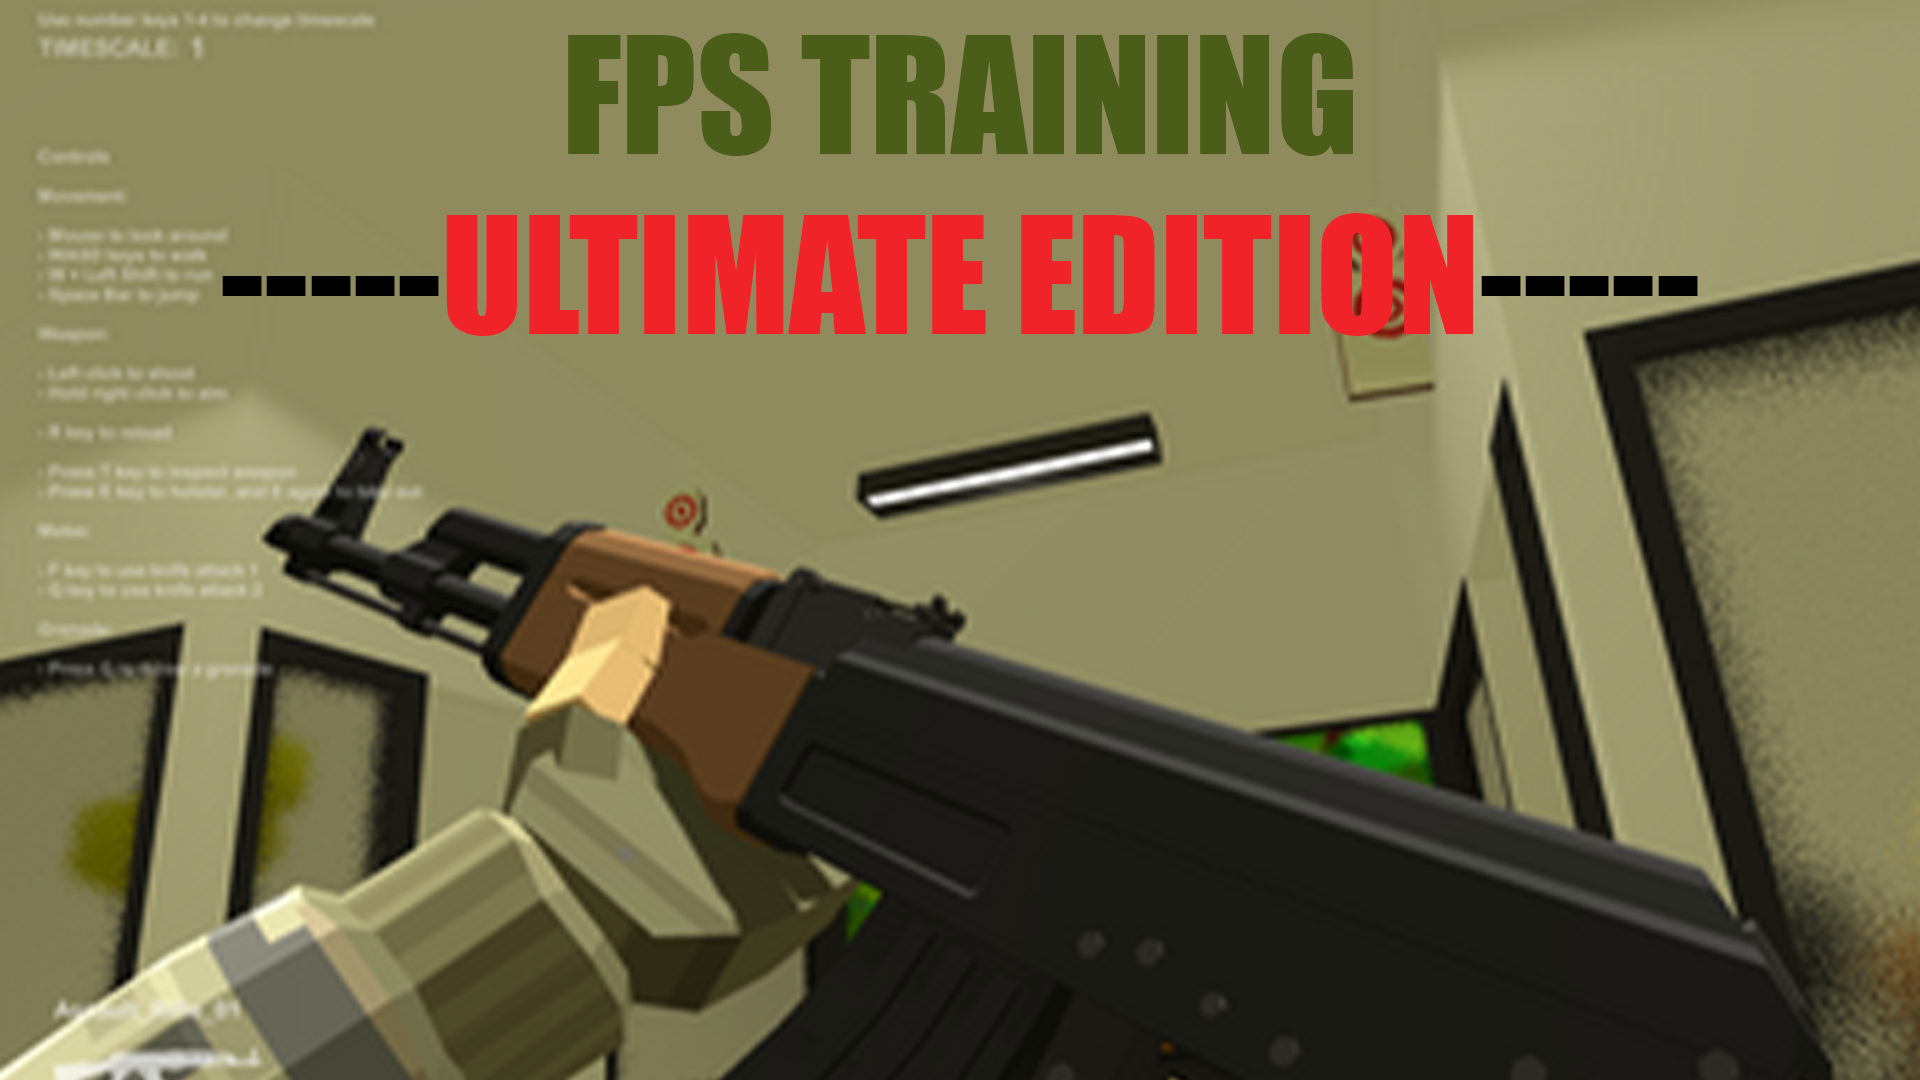 FPS TRAINING: Ultimate Edition